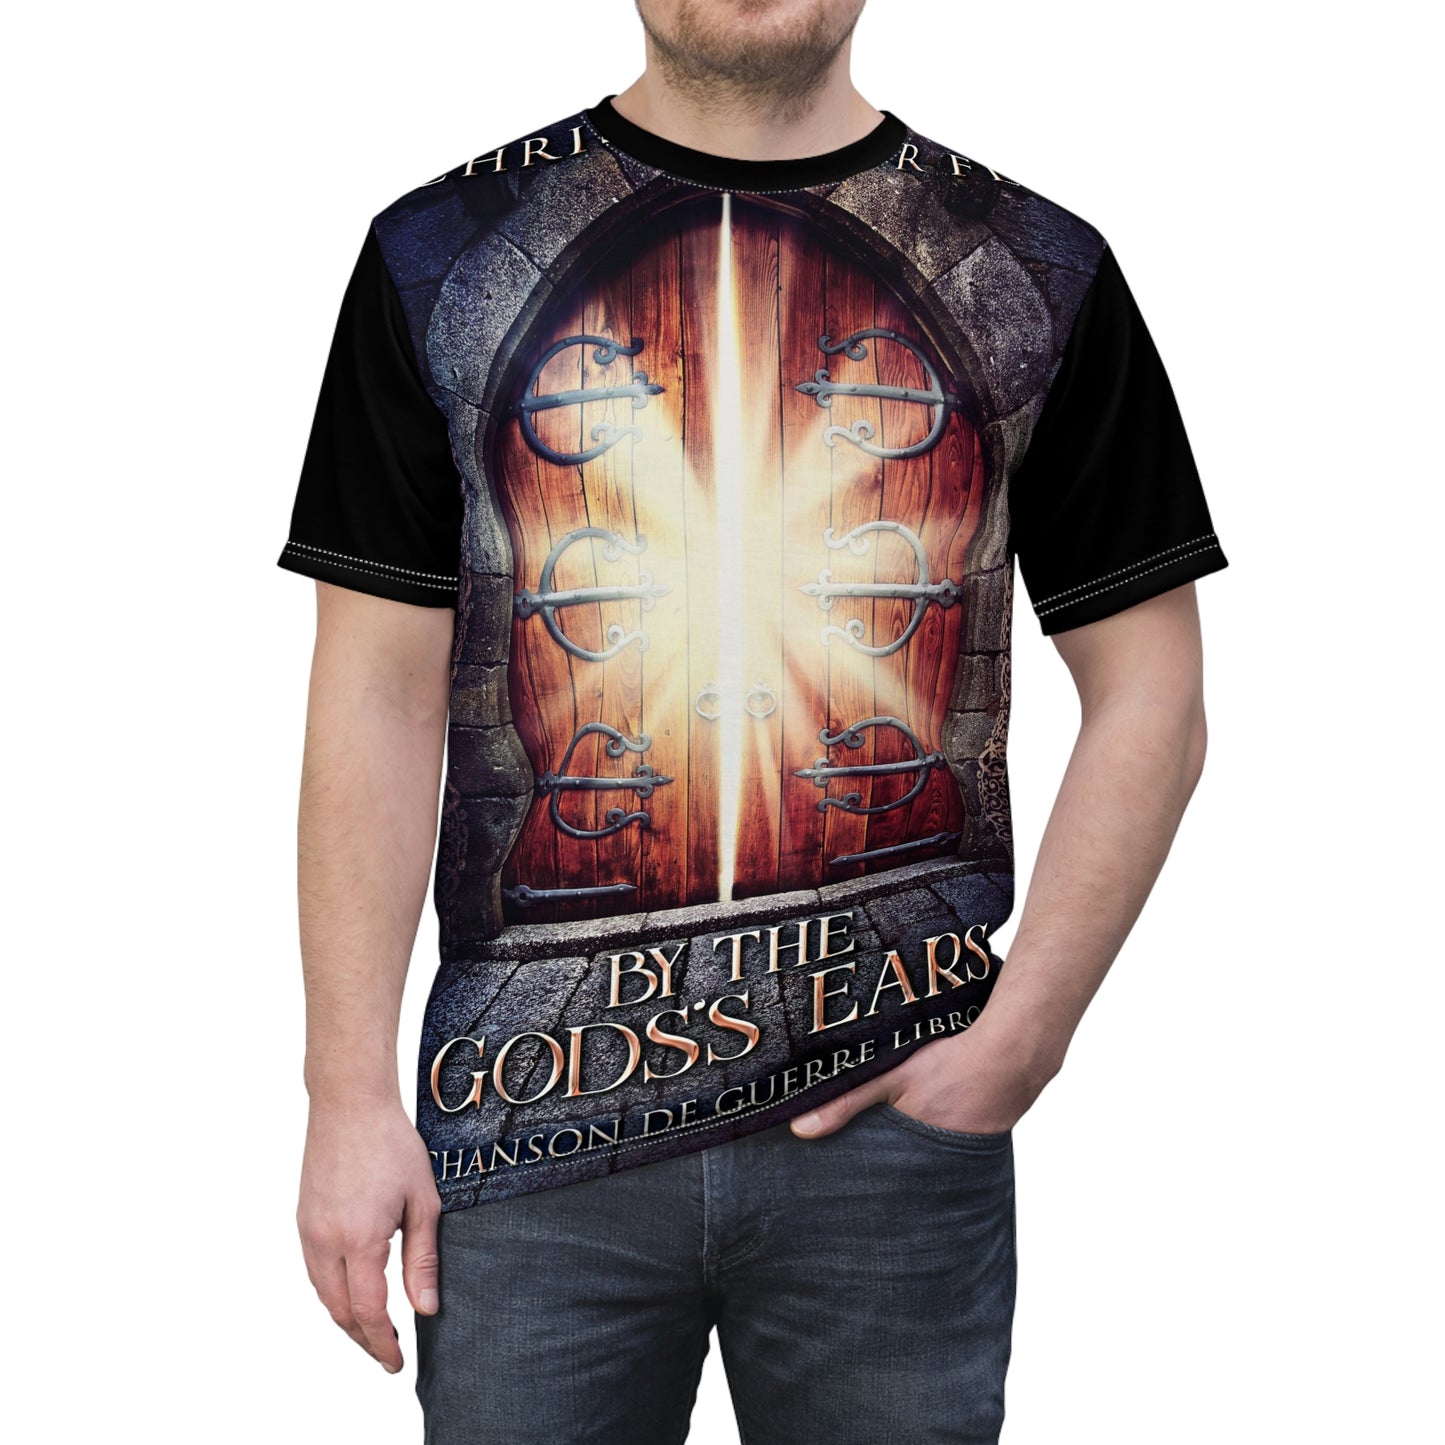 By The Gods's Ears - Unisex All-Over Print Cut & Sew T-Shirt